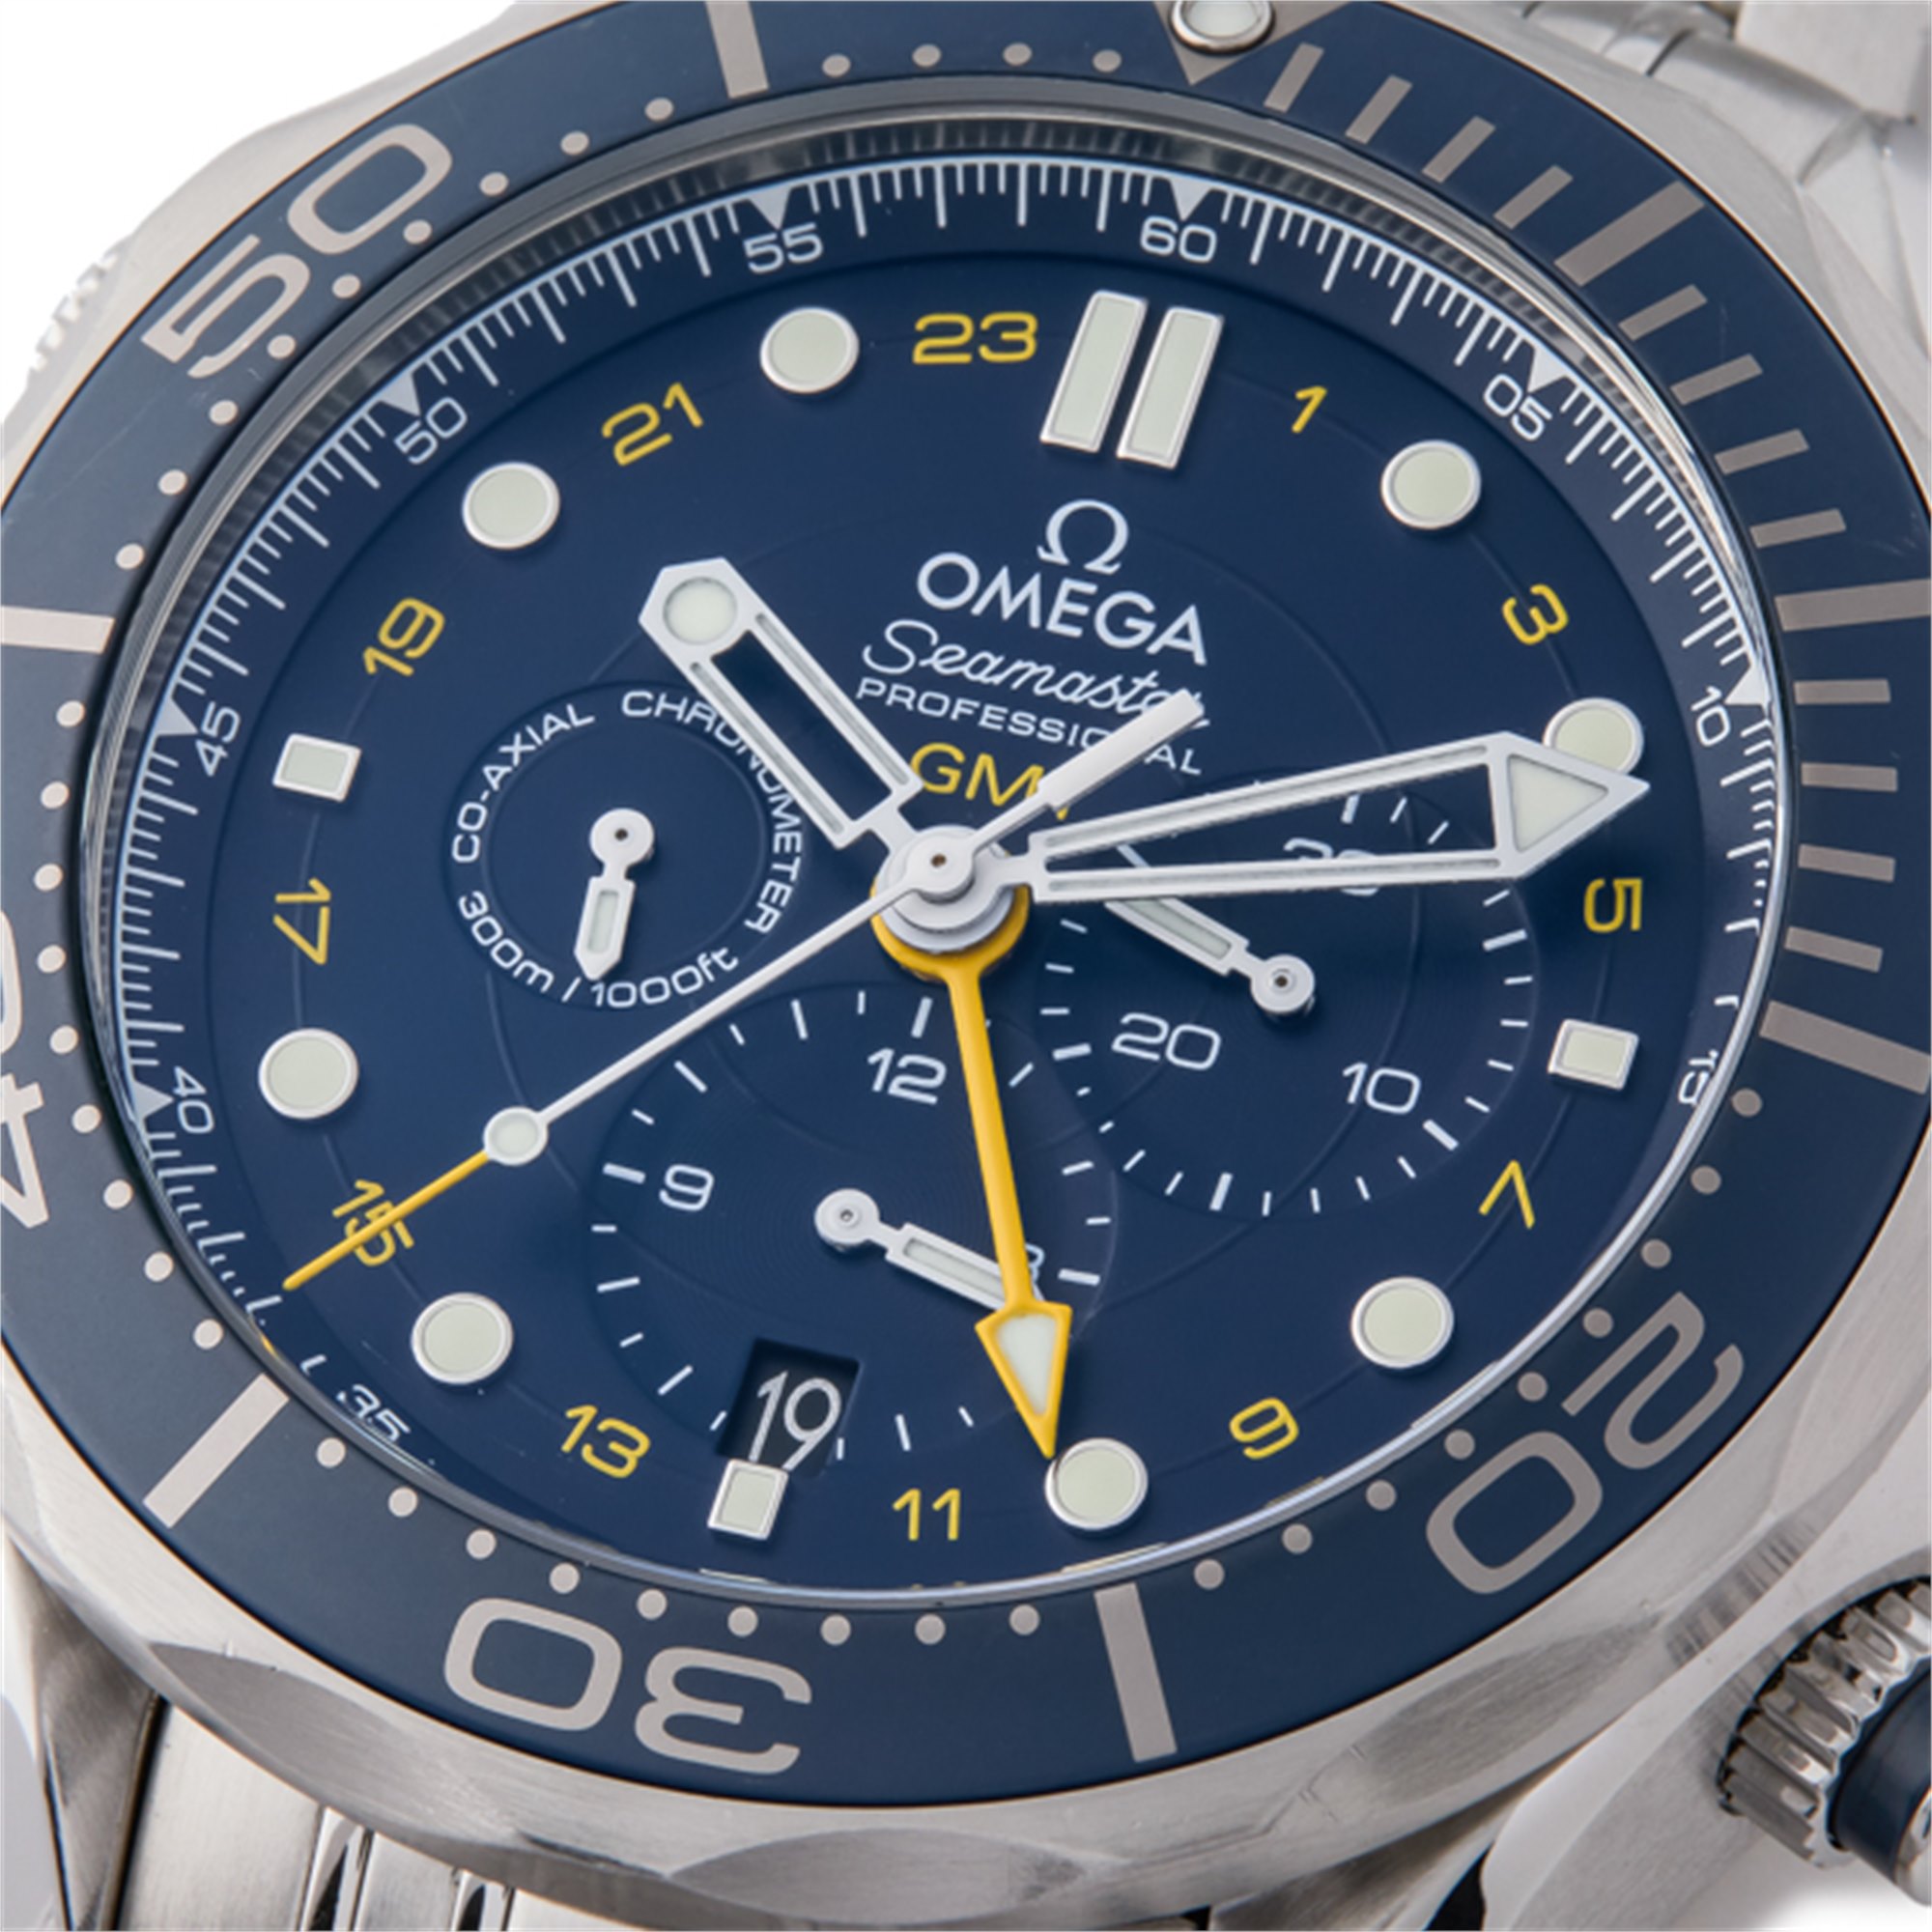 Omega Seamaster Chronograph GMT Stainless Steel 212.30.44.52.03.001